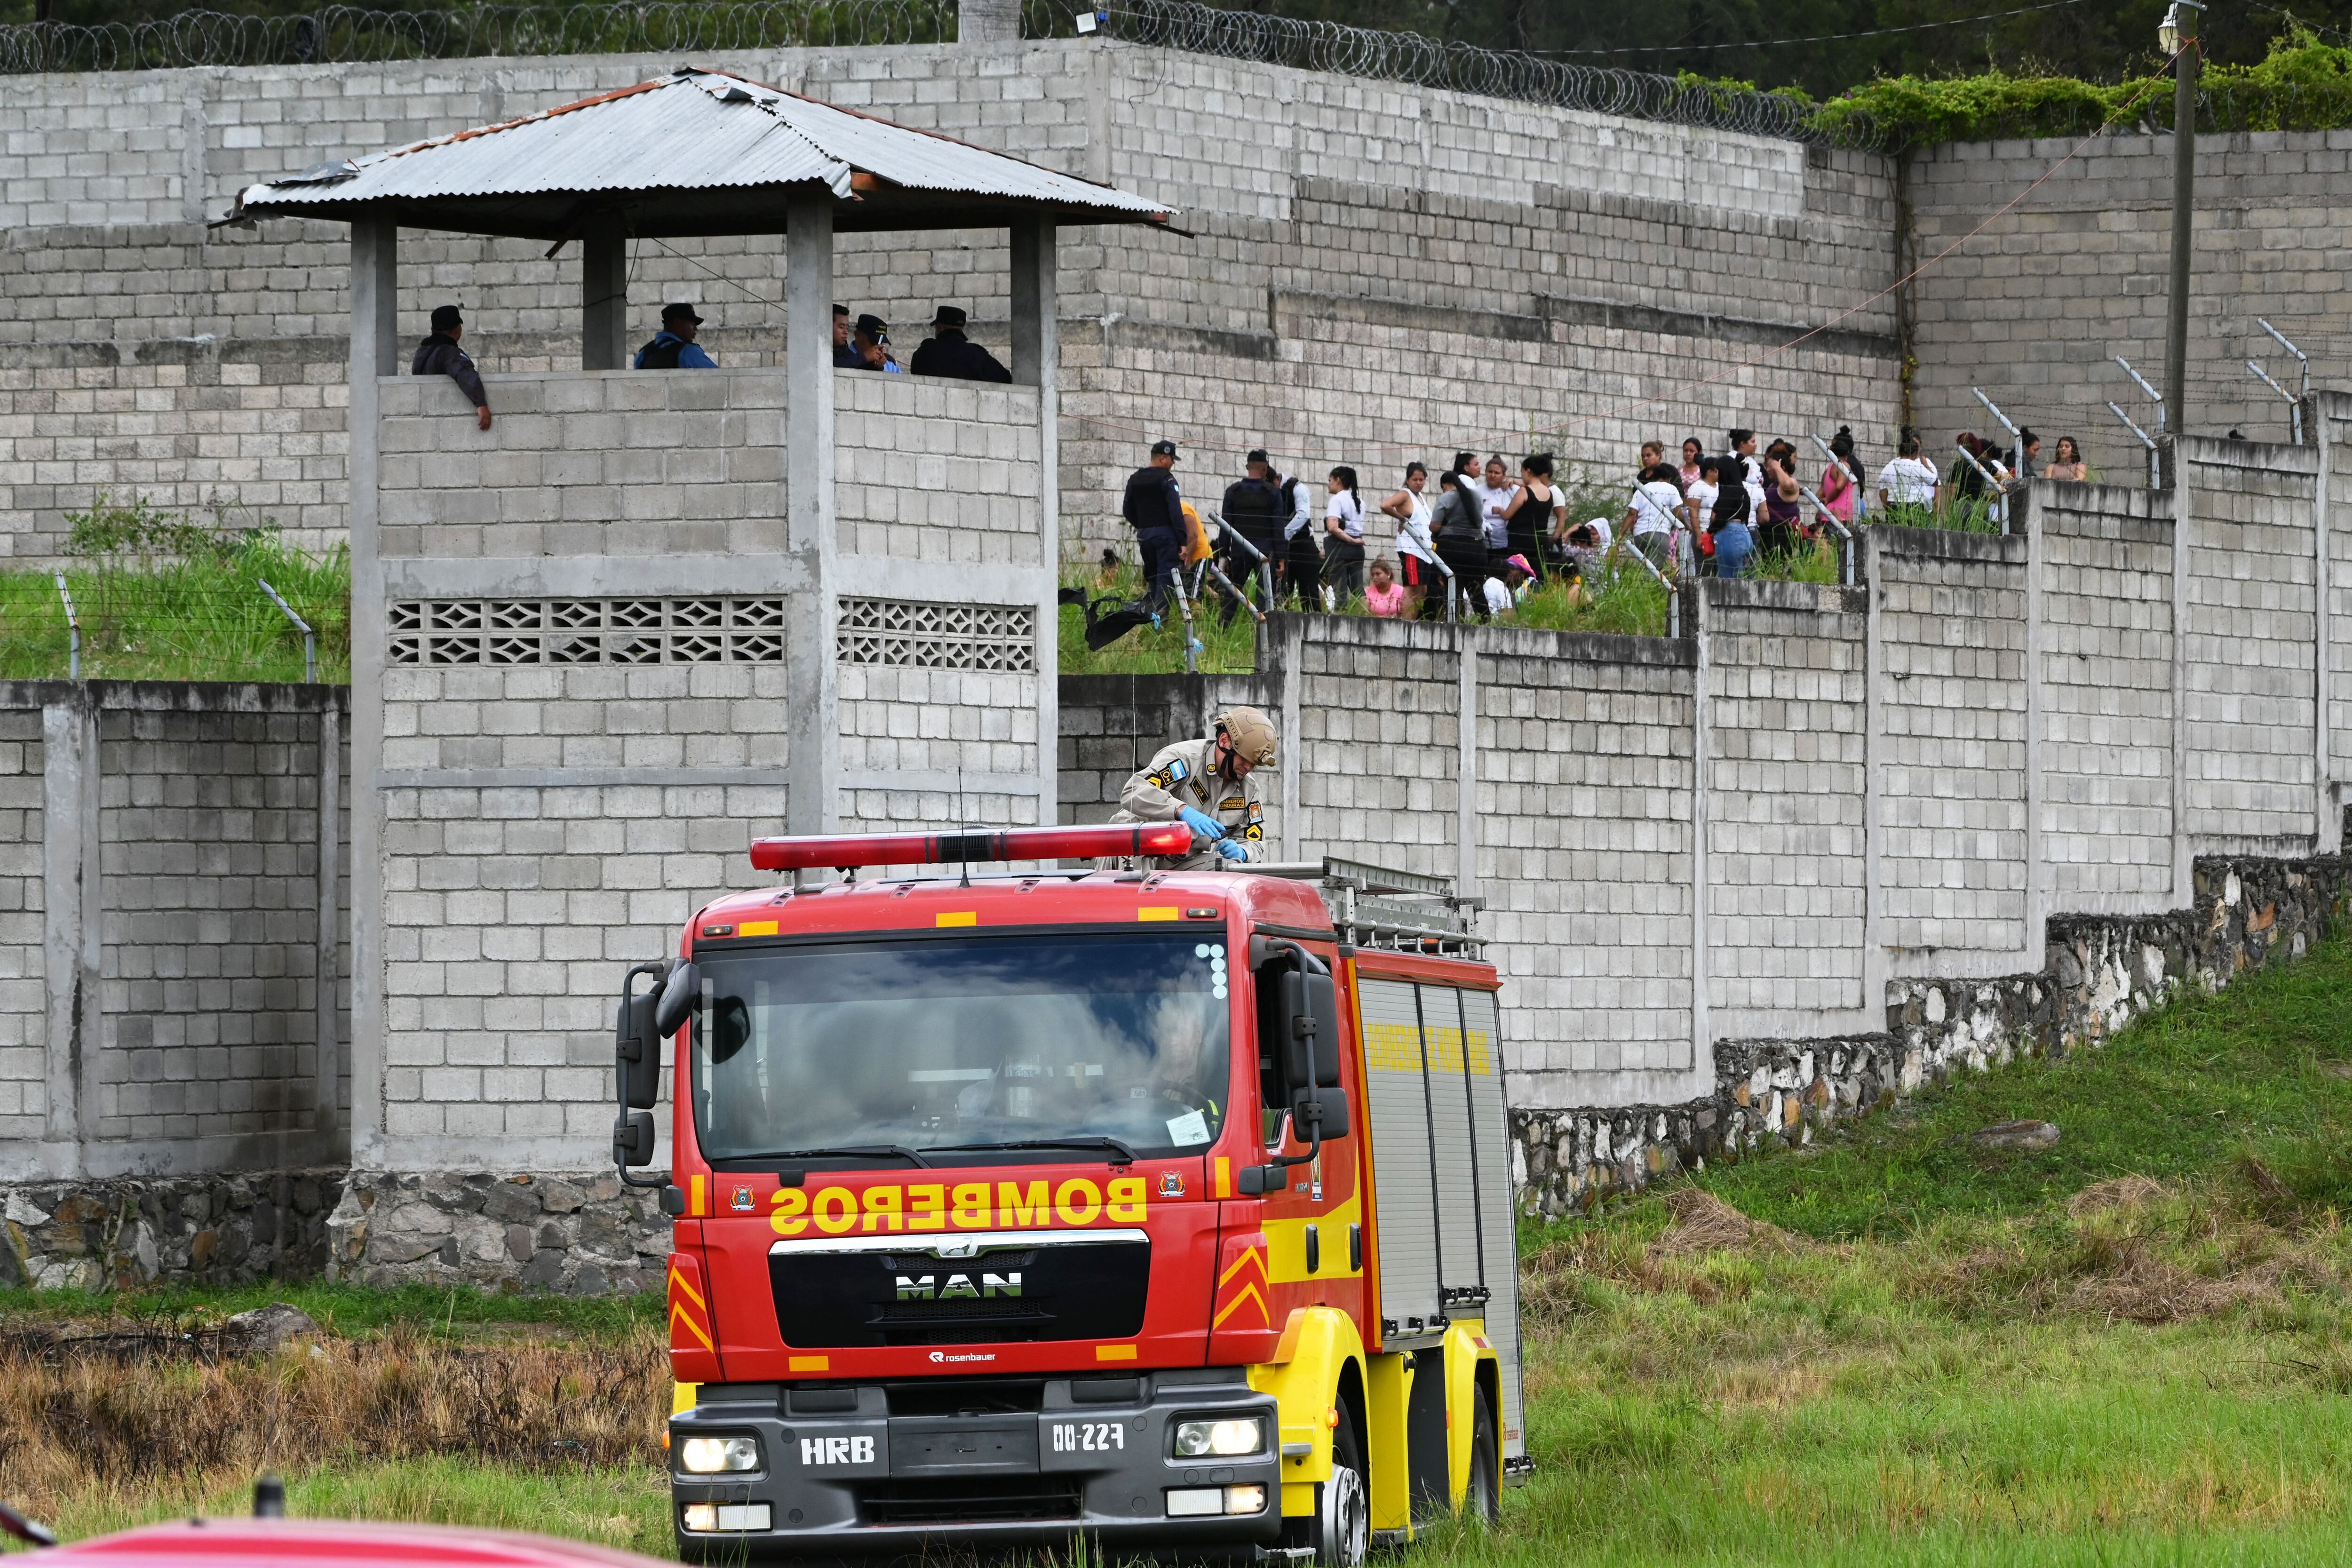 Prison guards guard inmates at the Centro de Adaptación Social de la Mujer (CEFAS) prison after a fire following a fight between inmates in Tamara, some 25 km from Tegucigalpa, Honduras, on June 20, 2023. (Photo by Orlando SIERRA / AFP)